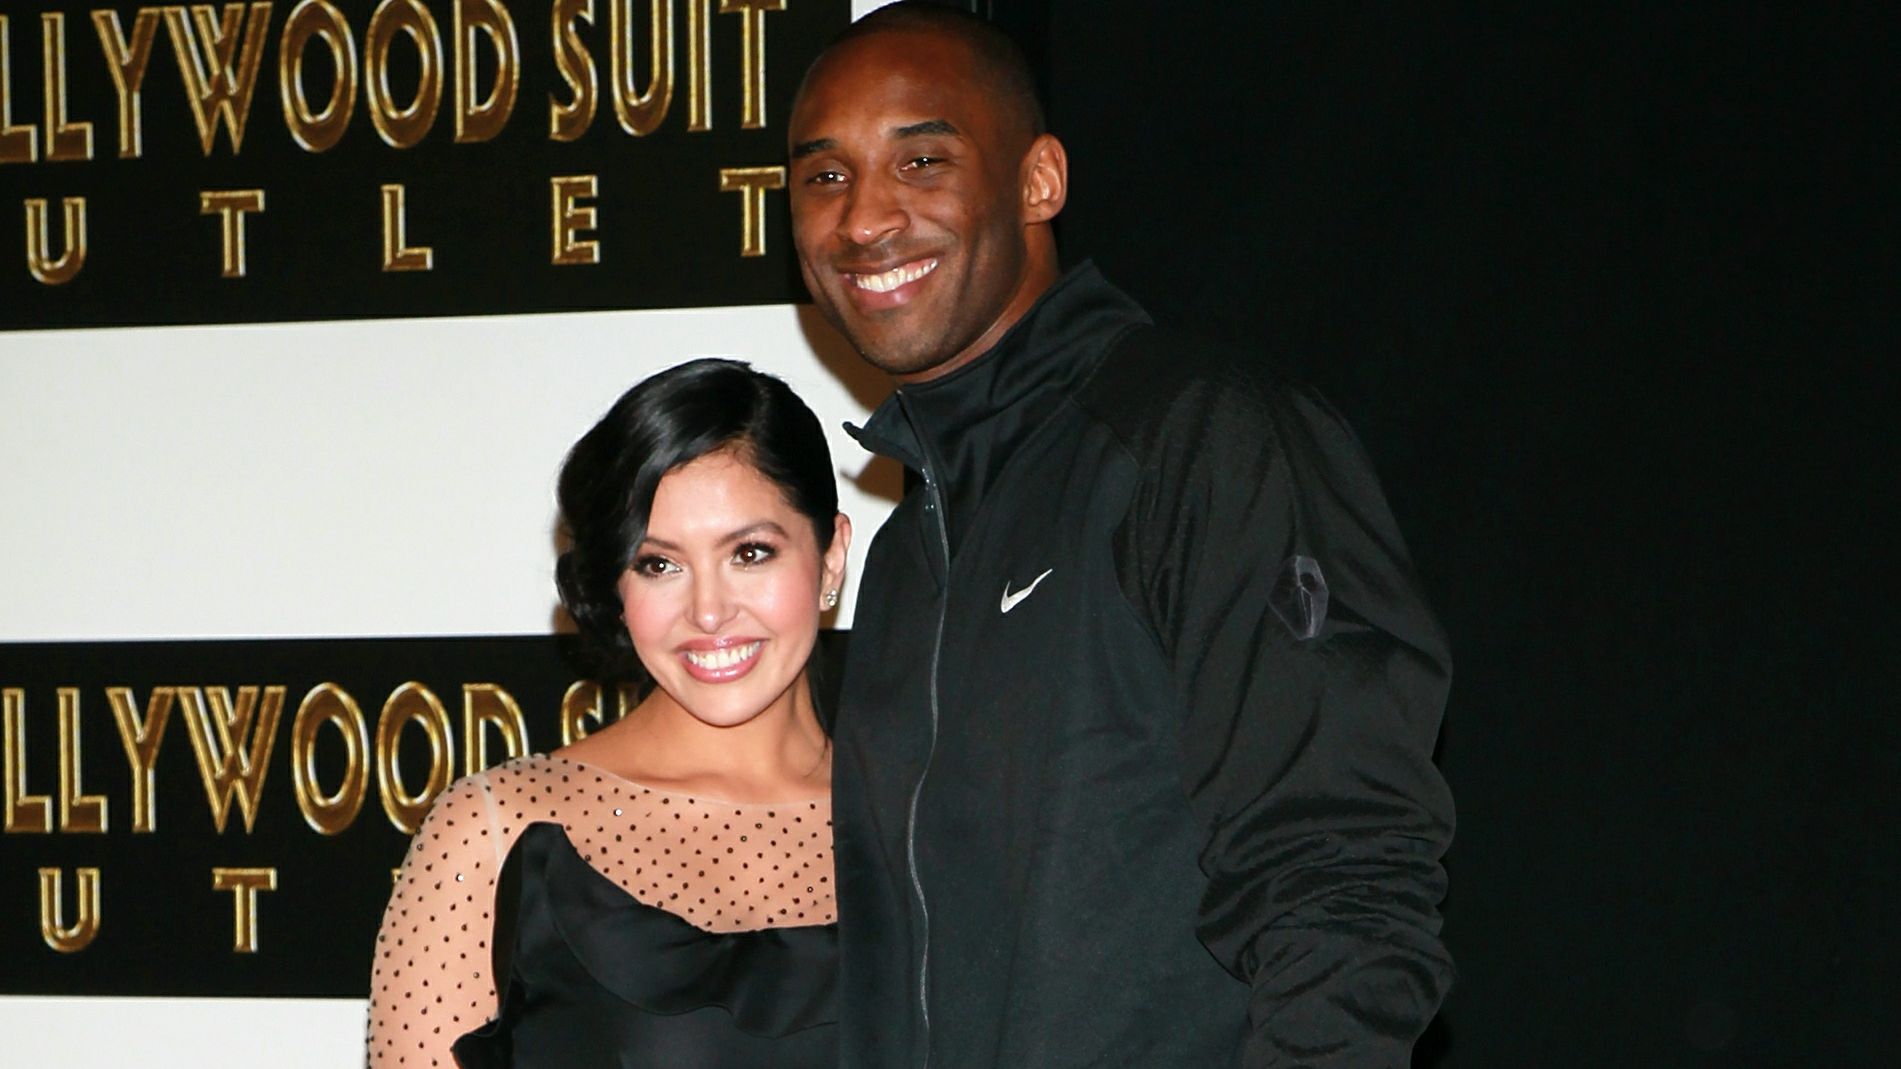 Kobe Bryant and his wife, Vanessa, attend his Hollywood Walk of Fame ceremony in February.